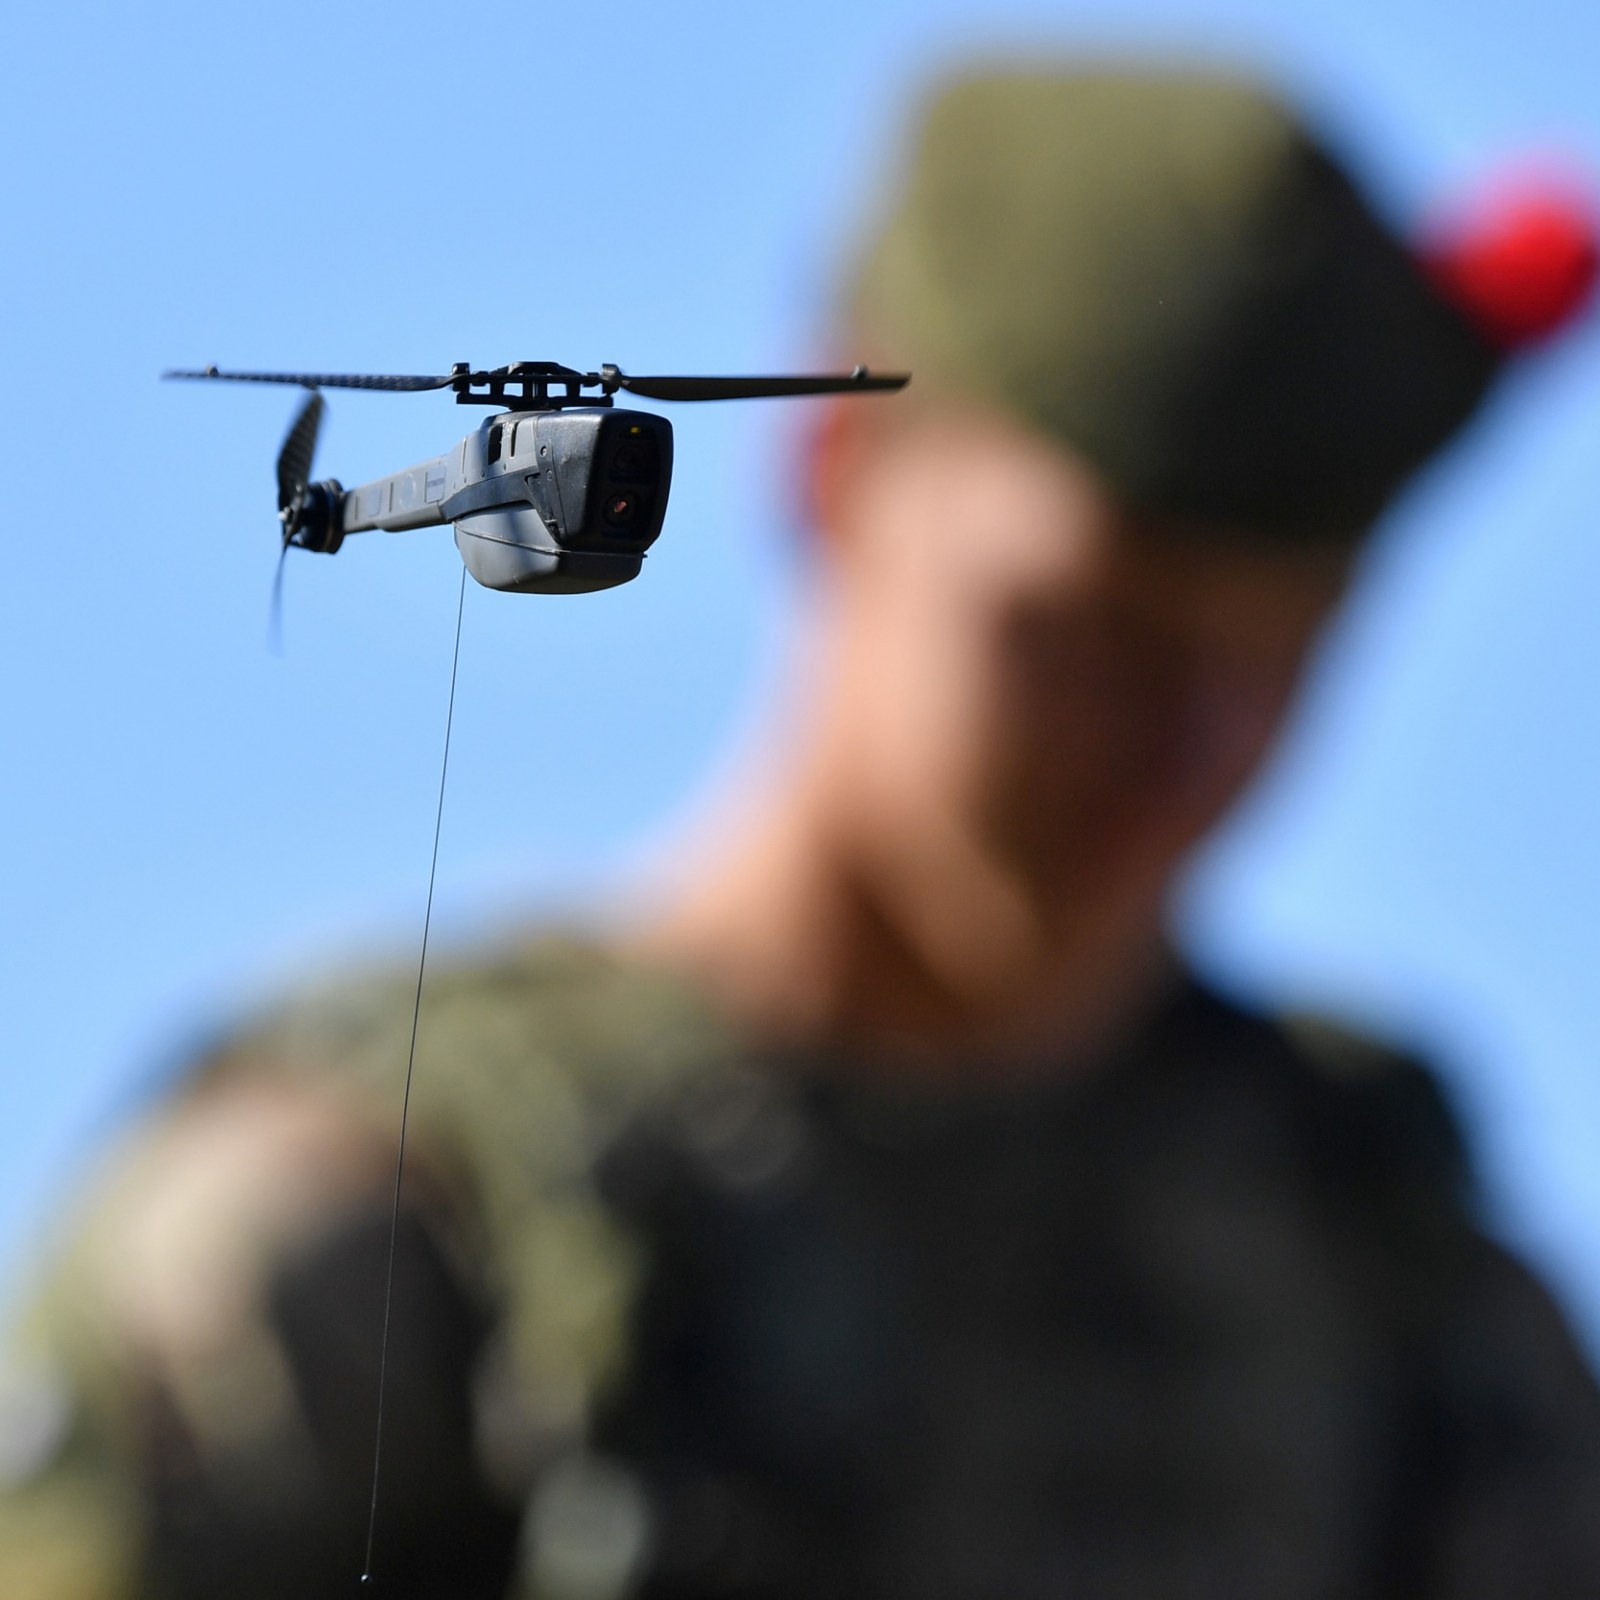 Bred vifte Gør alt med min kraft Windswept What Are Black Hornets? The Cutting-Edge Micro-Drones Donated to Ukraine